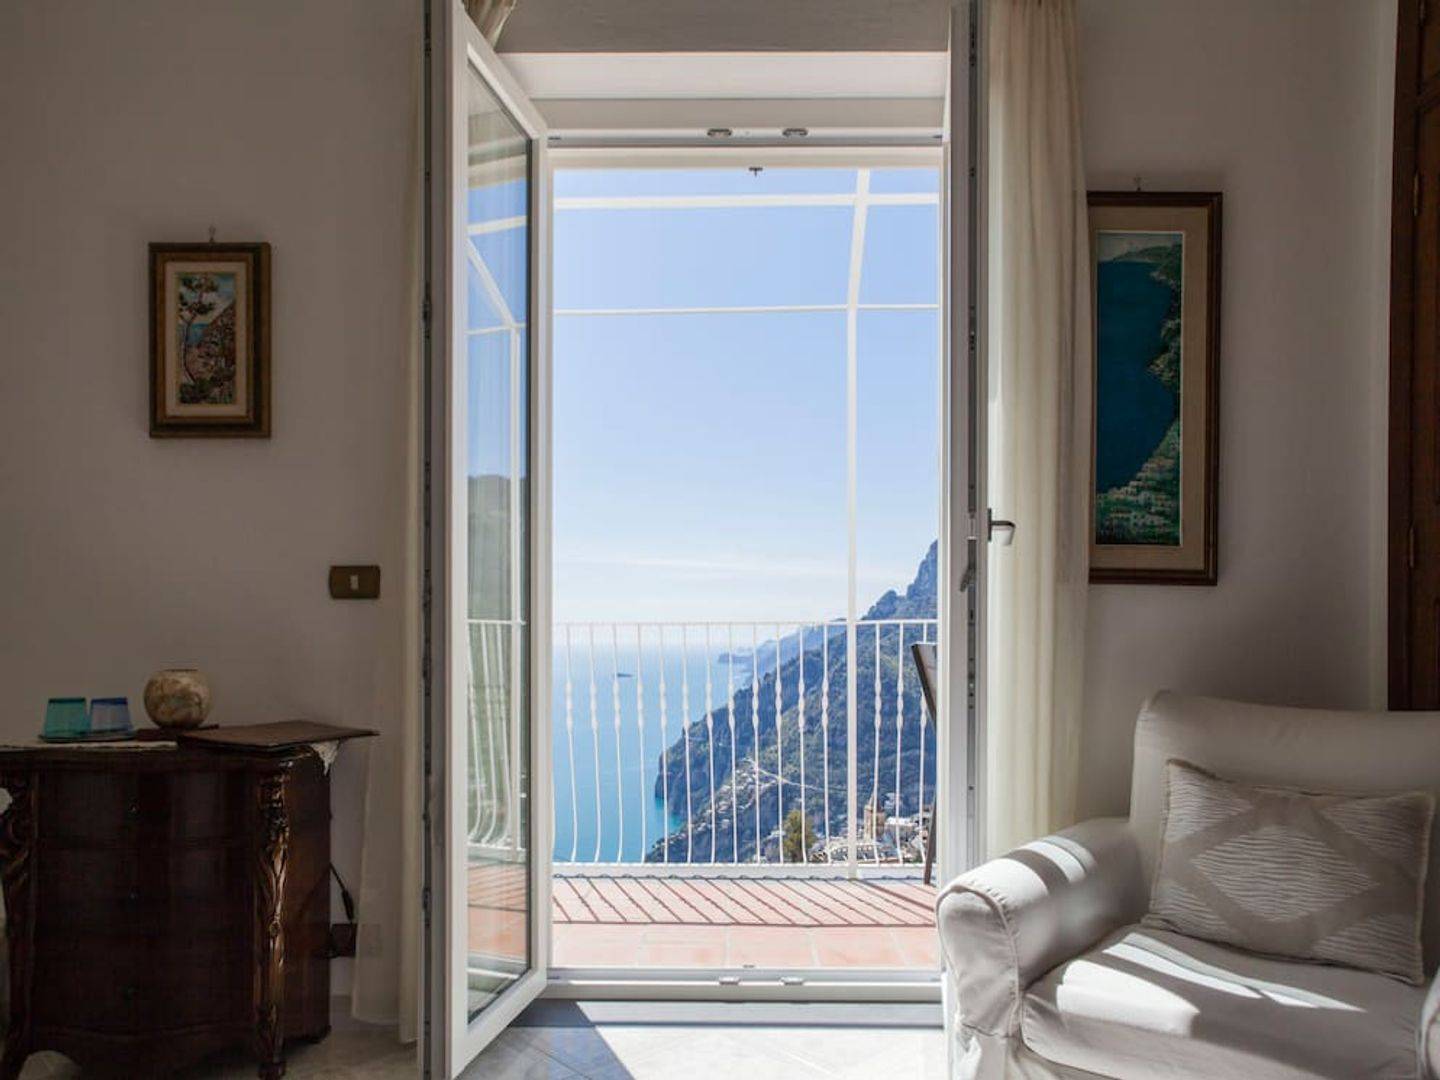 Positano Bed and Breakfast